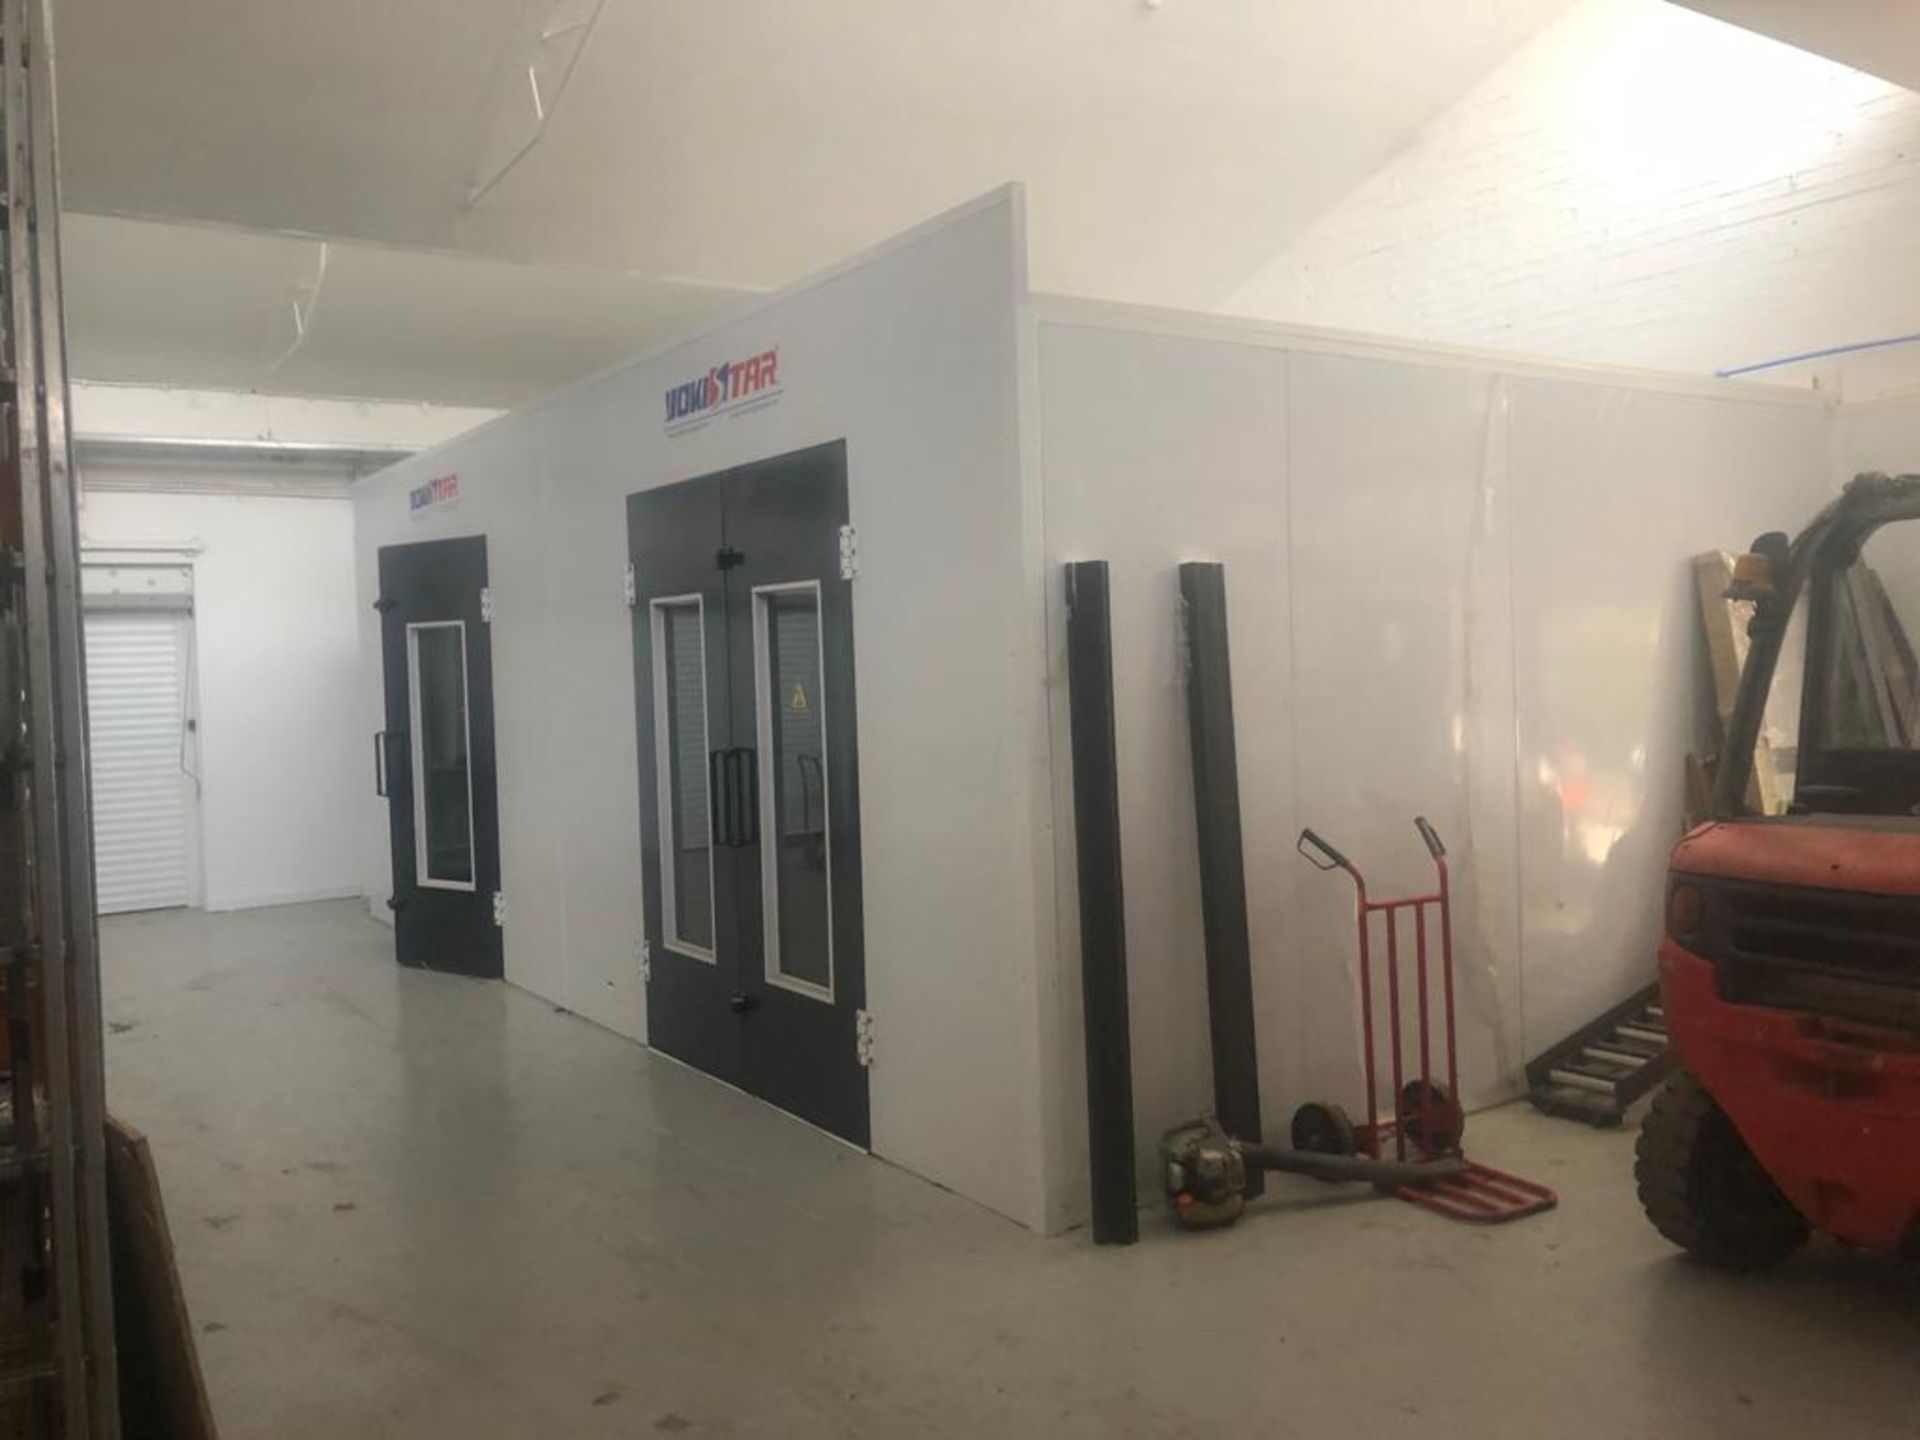 THIS IS A BRAND NEW SPRAY BOOTH WITH A DRYING ROOM USING INFARED HEATING *PLUS VAT* - Image 4 of 19